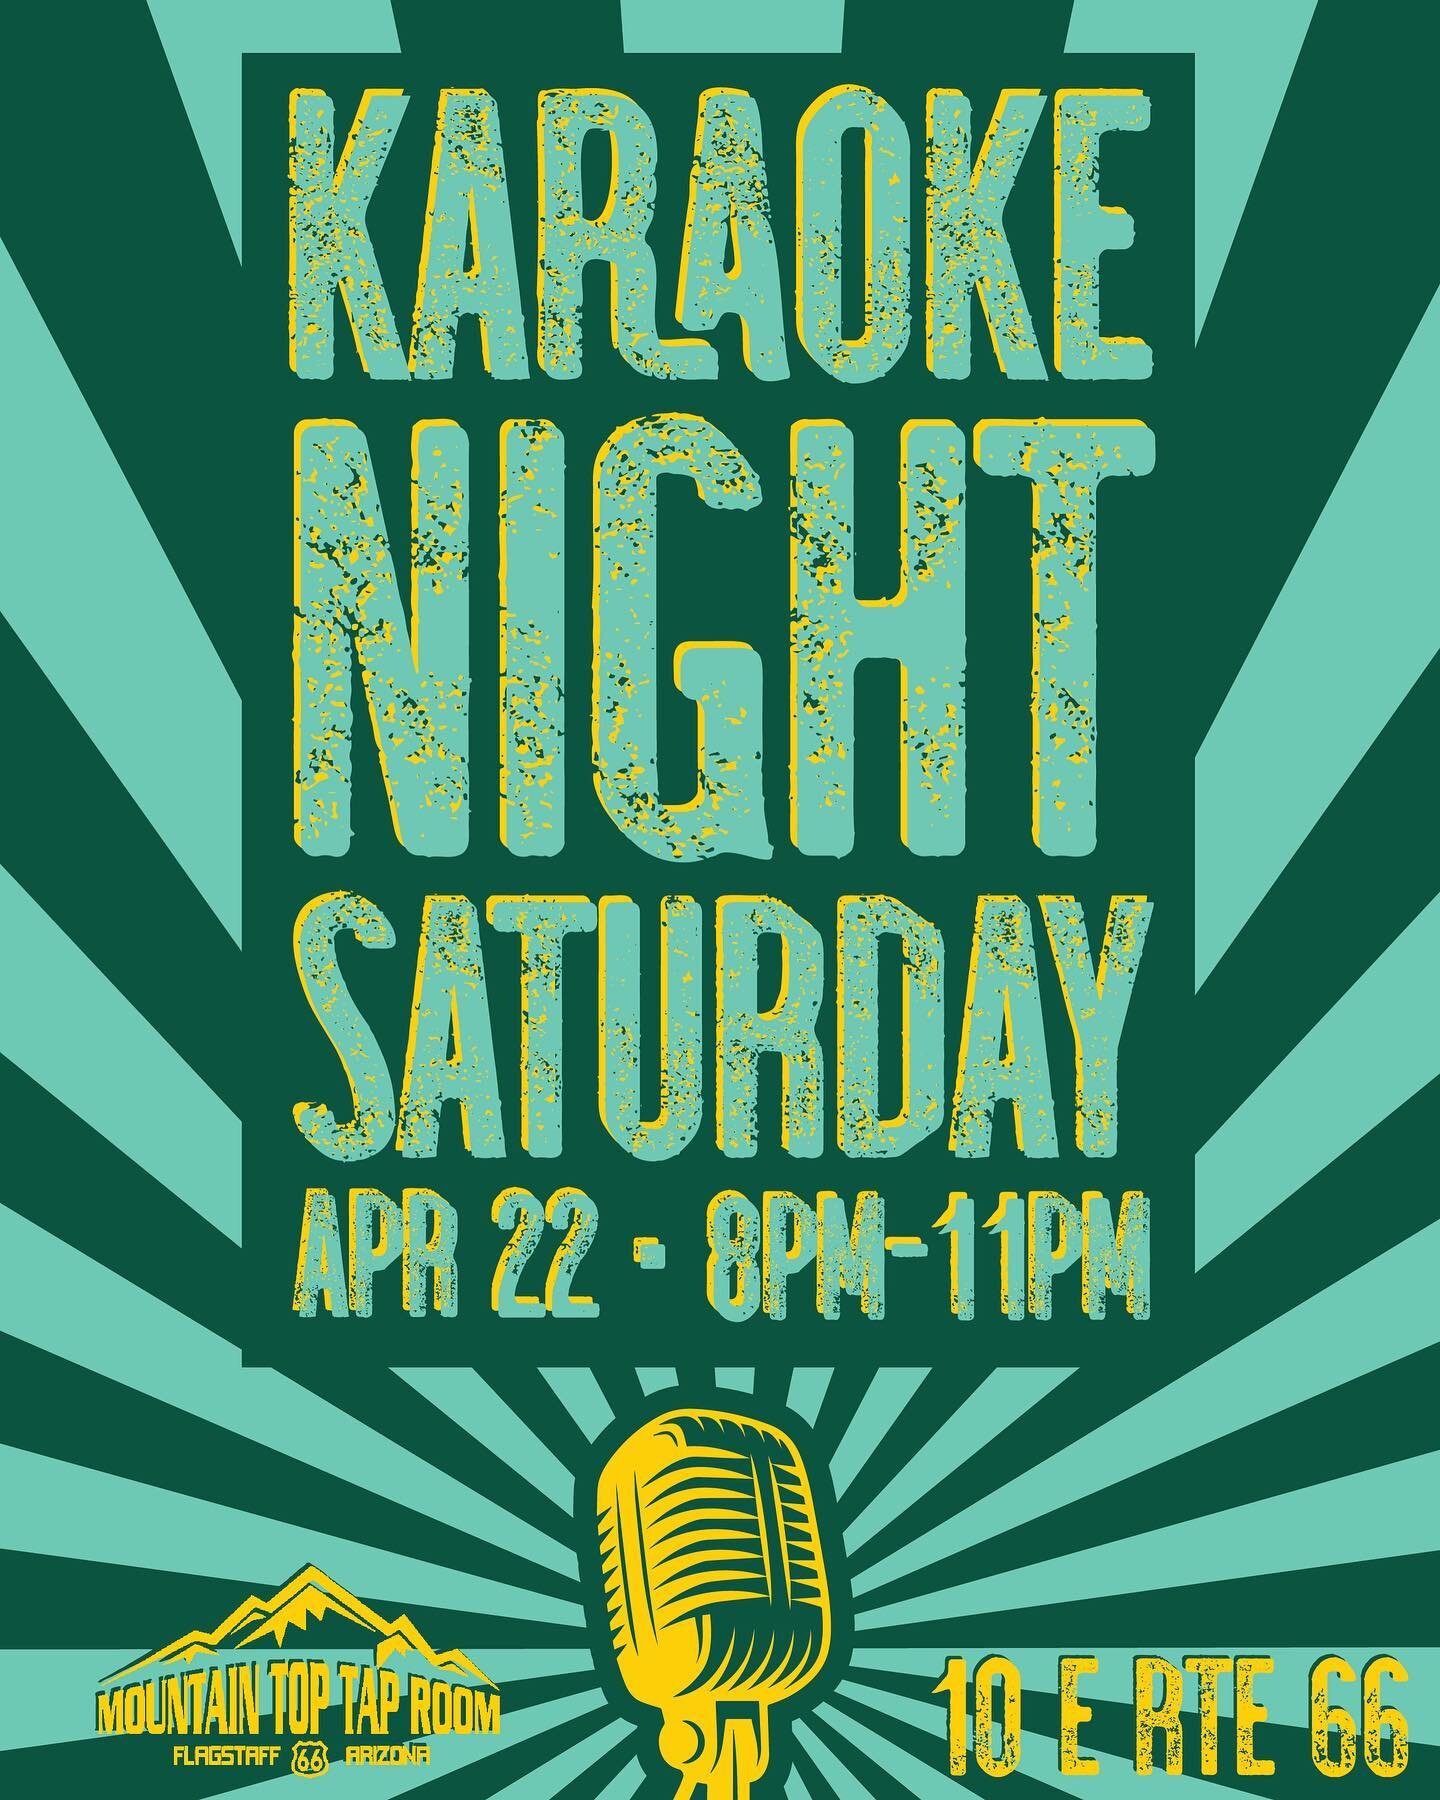 🌟KARAOKE NIGHT!🌟🎤🕺🏻🪩🎉 We&rsquo;re finally doing it, y&rsquo;all! Join us on Saturday, April 22nd for beer, karaoke, and an all around jolly good time!